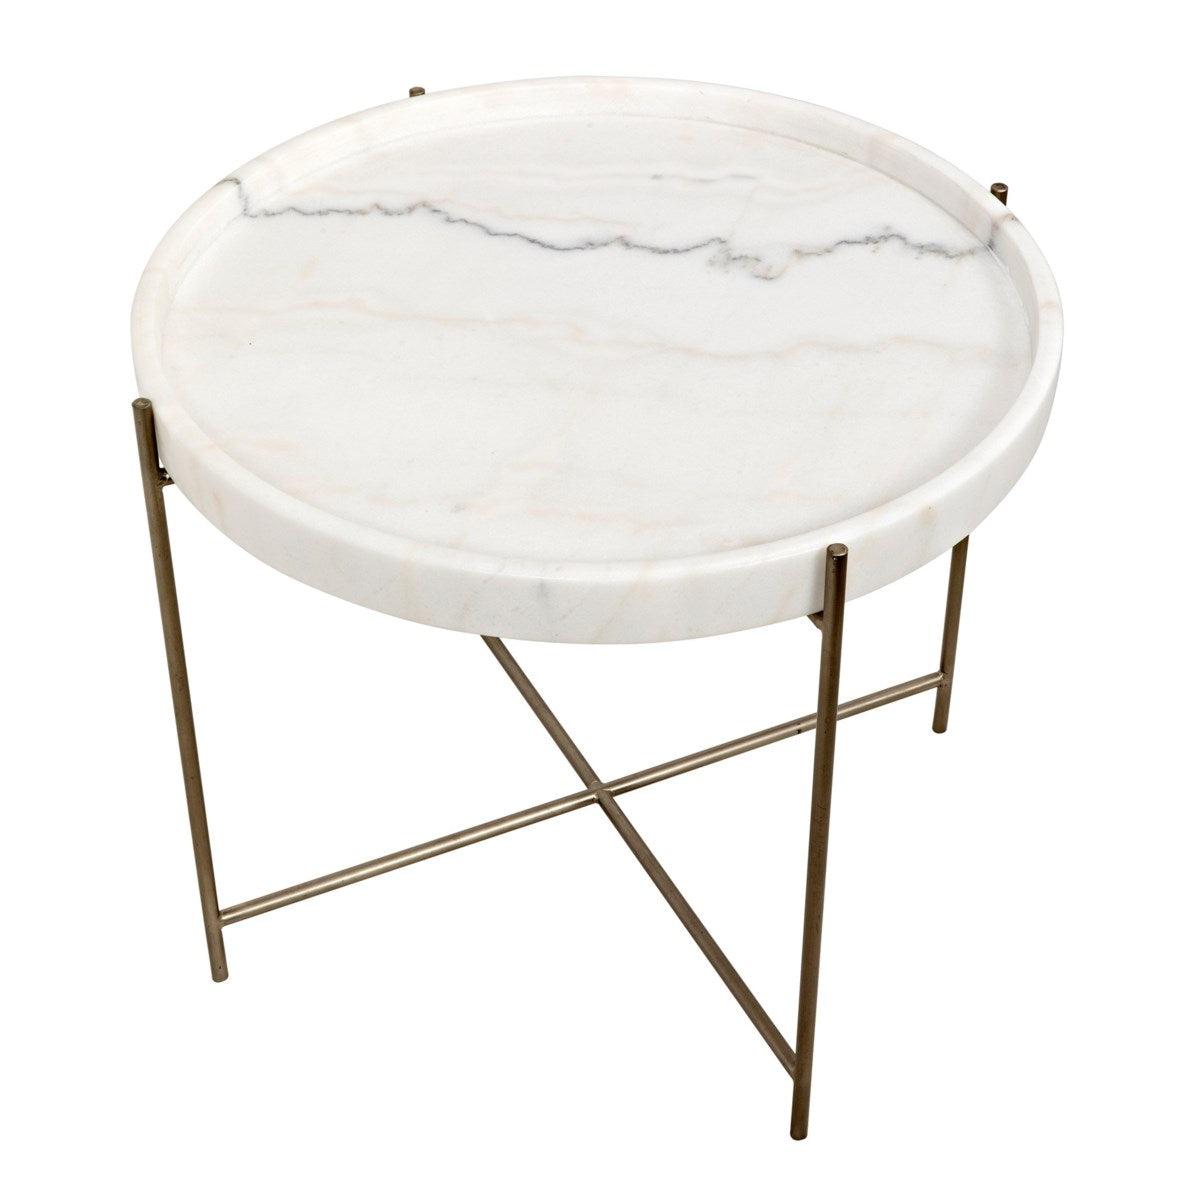 Noir Furniture Chuy Side Table, Antique Silver, Metal and Stone-Noir Furniture-Blue Hand Home